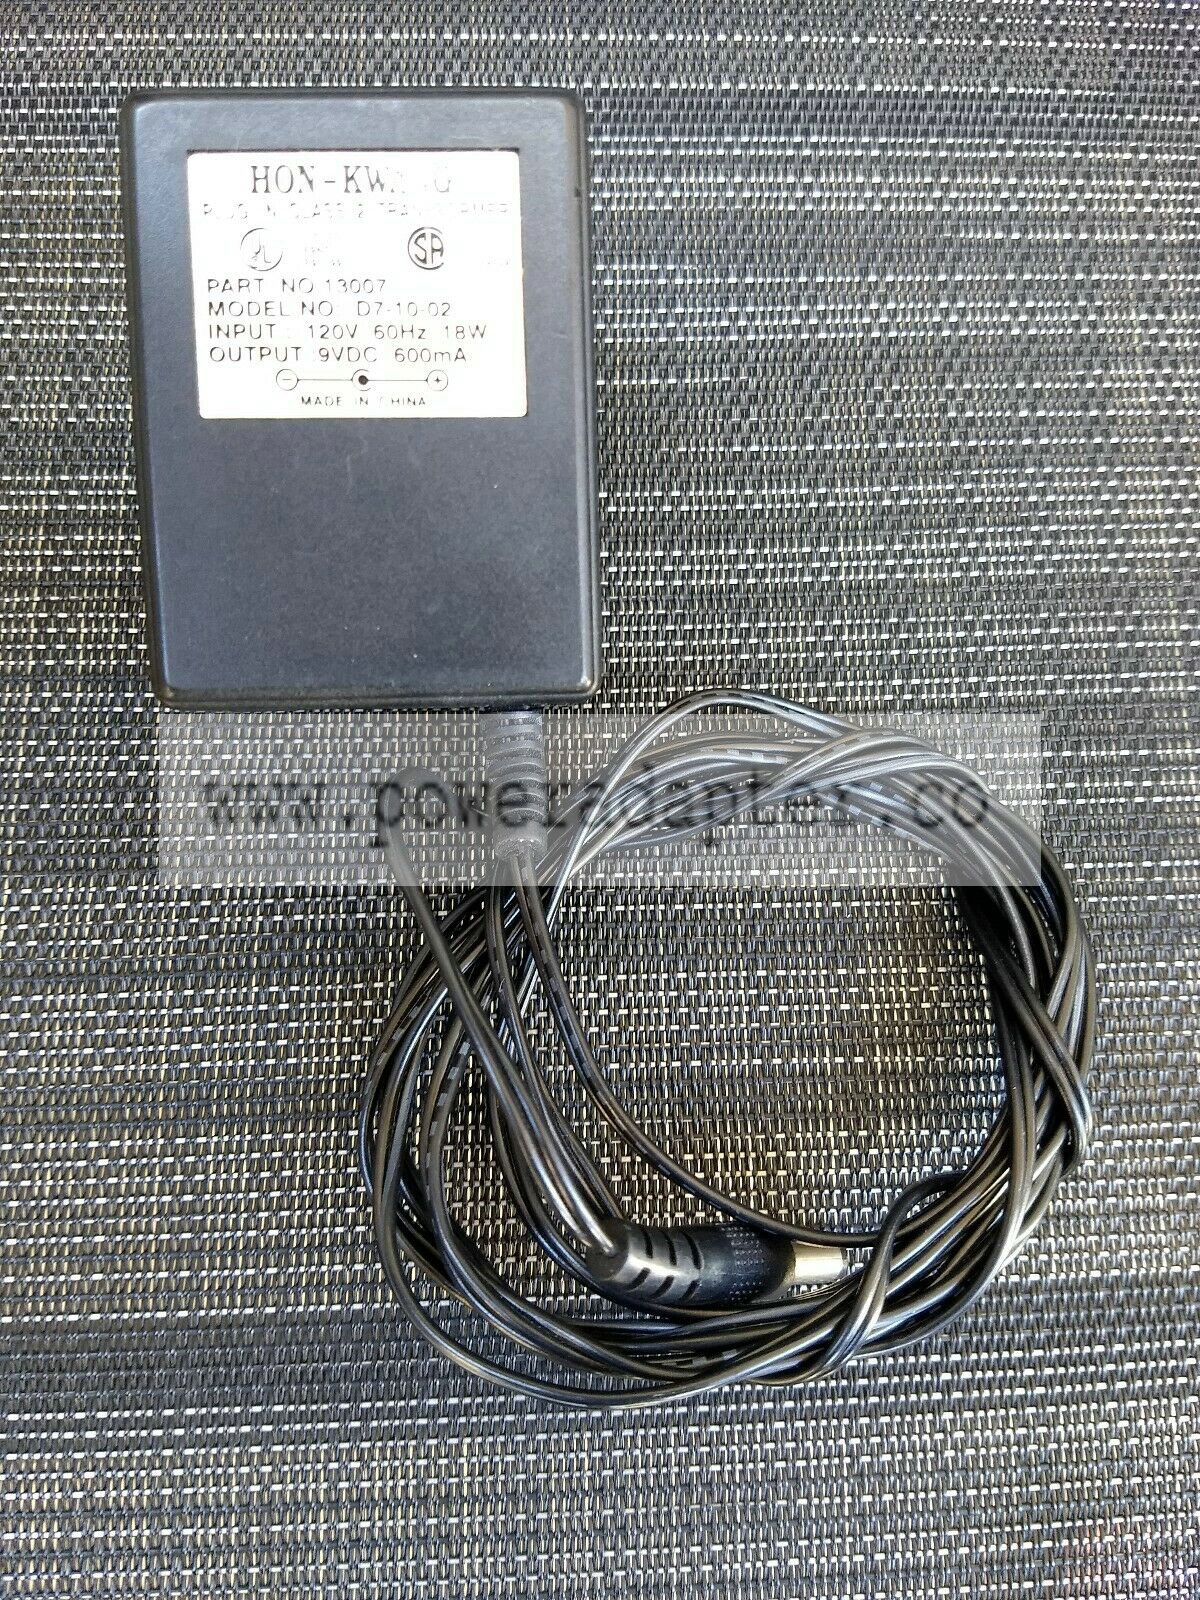 Hon Kwang Power Supply AC Adapter 13007 Transformer D7-10-02 - Output 9VDC 600mA Product Type: Transformer Type: Wall